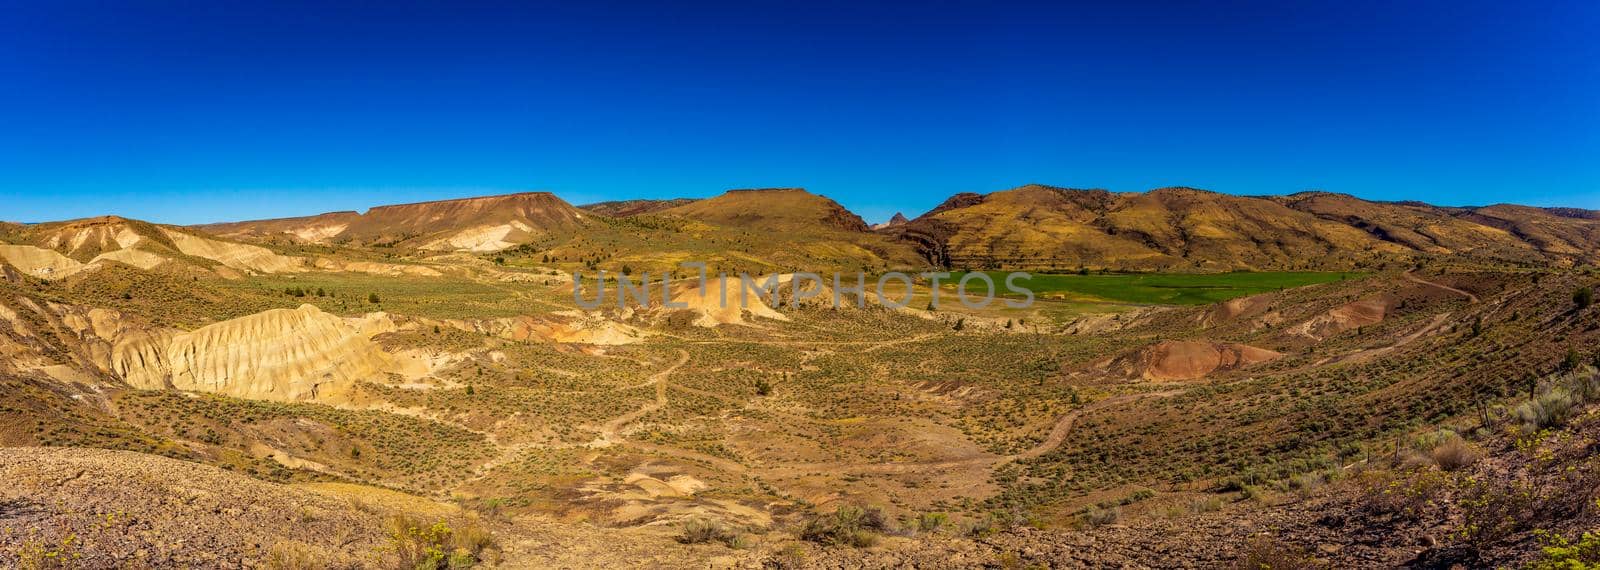 Mascall Formation at John Day Fossil Beds Natonal Monument by gepeng